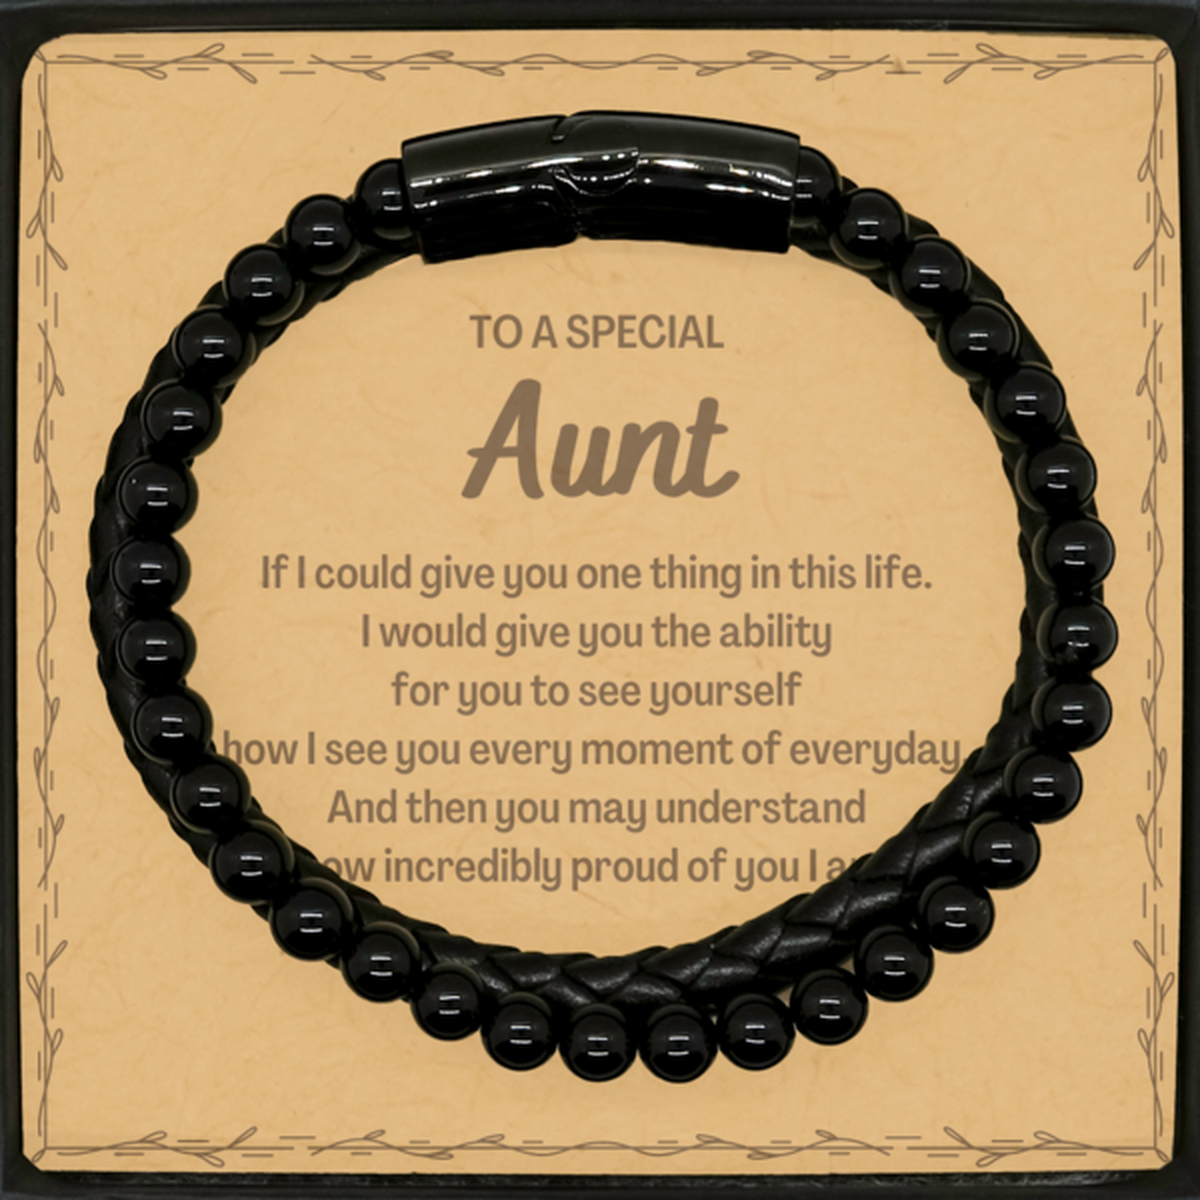 To My Aunt Stone Leather Bracelets, Gifts For Aunt Message Card, Inspirational Gifts for Christmas Birthday, Epic Gifts for Aunt To A Special Aunt how incredibly proud of you I am